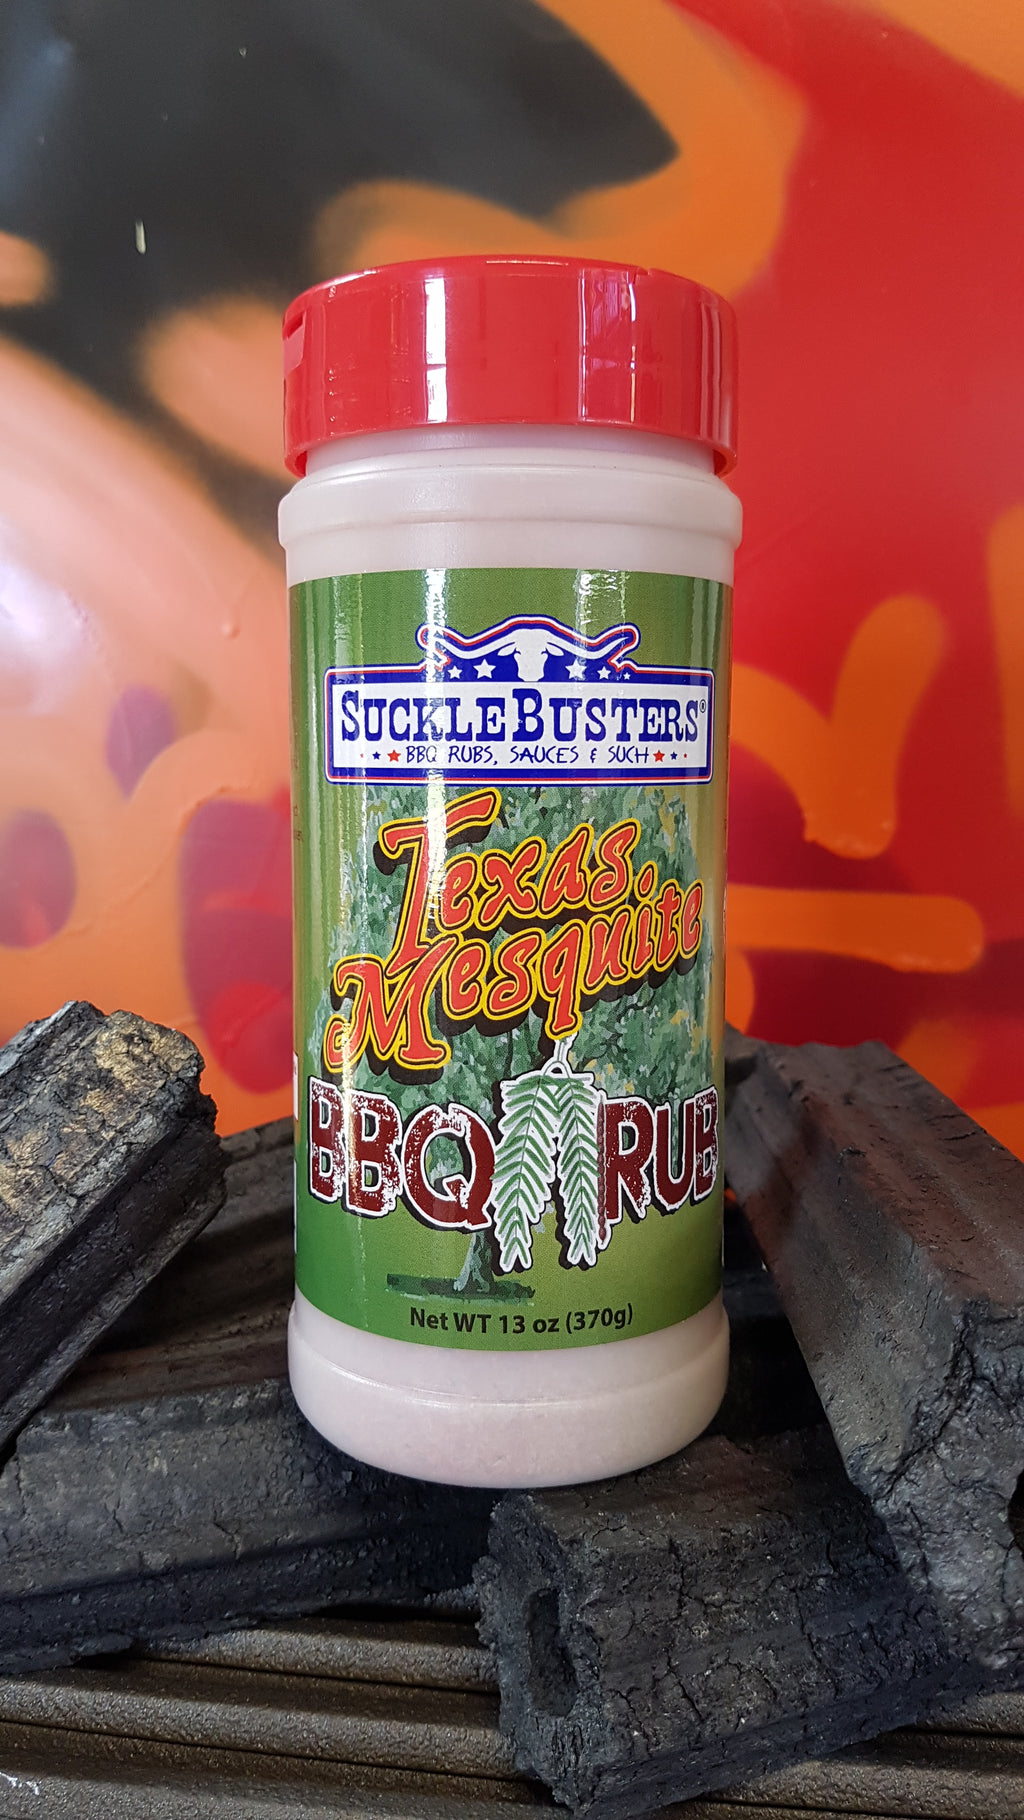 Texas Mesquite BBQ Rub 370g by Sucklebusters